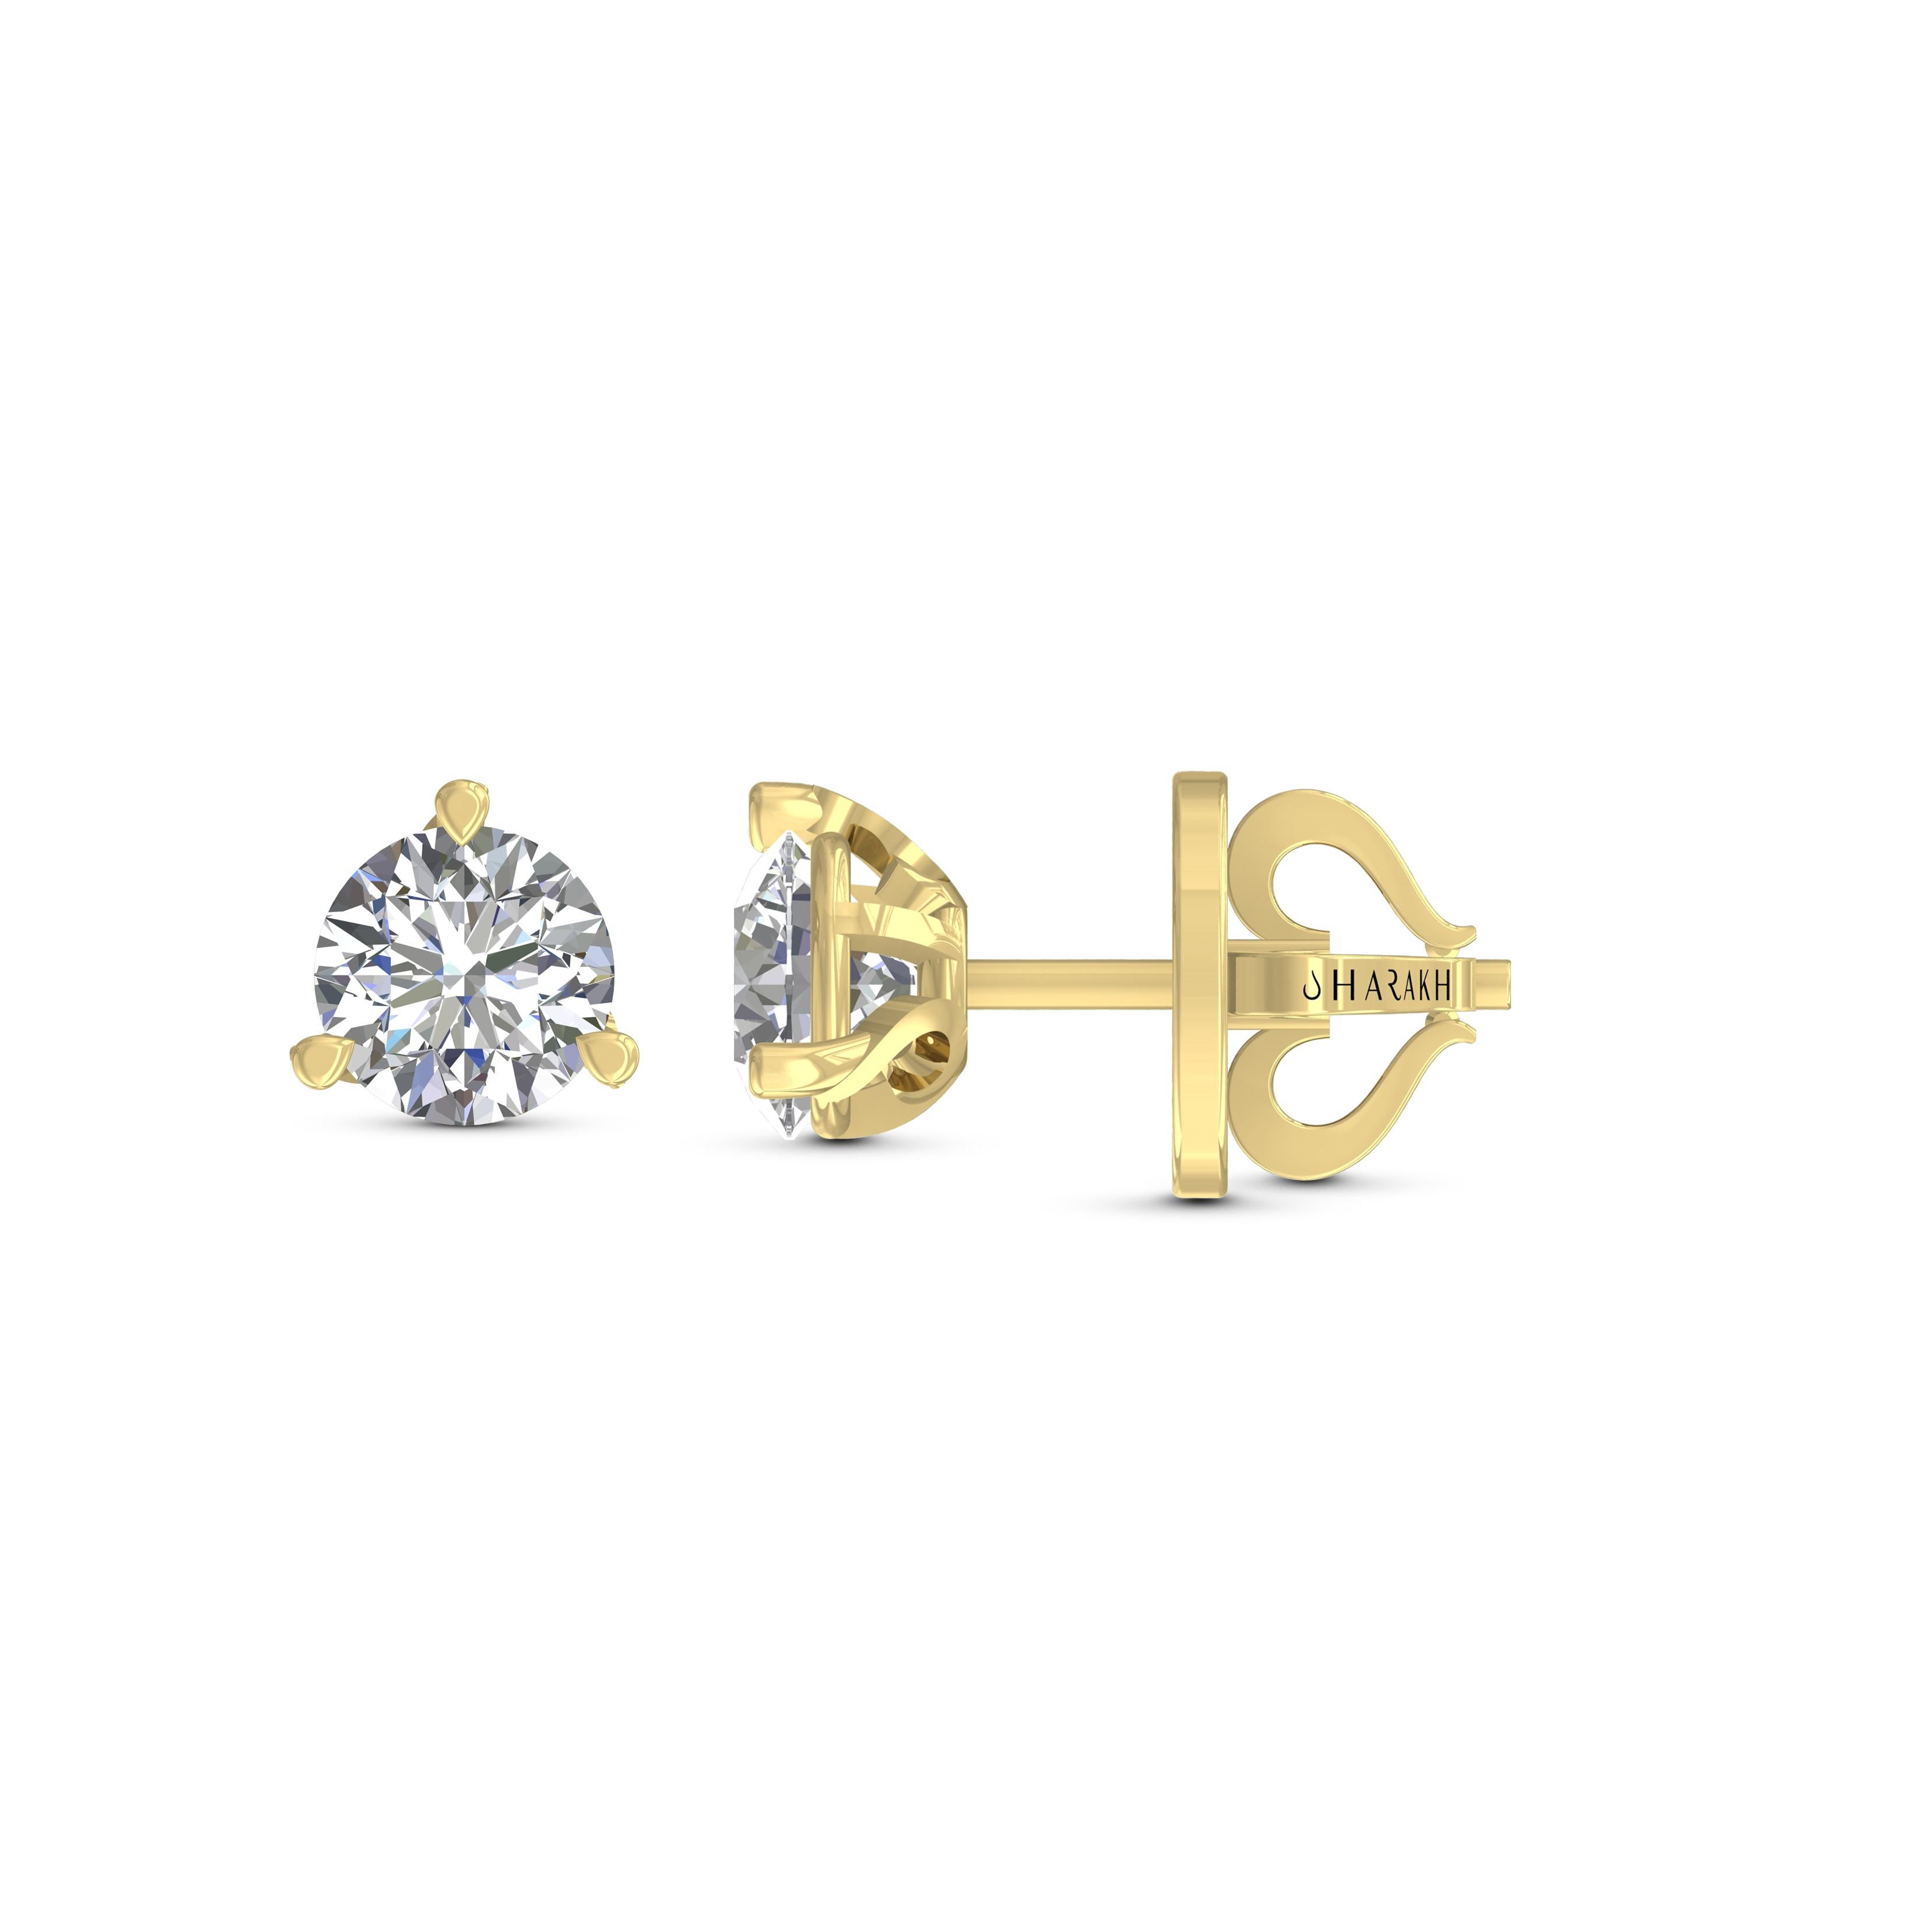 These classic GIA certified diamond studs showcase a pair of perfectly matched diamonds weighing total 2.00 carats. Crafted in 18 karat yellow gold, these are available in white and rose gold as well.
Perfect for gifting and for yourself as well.